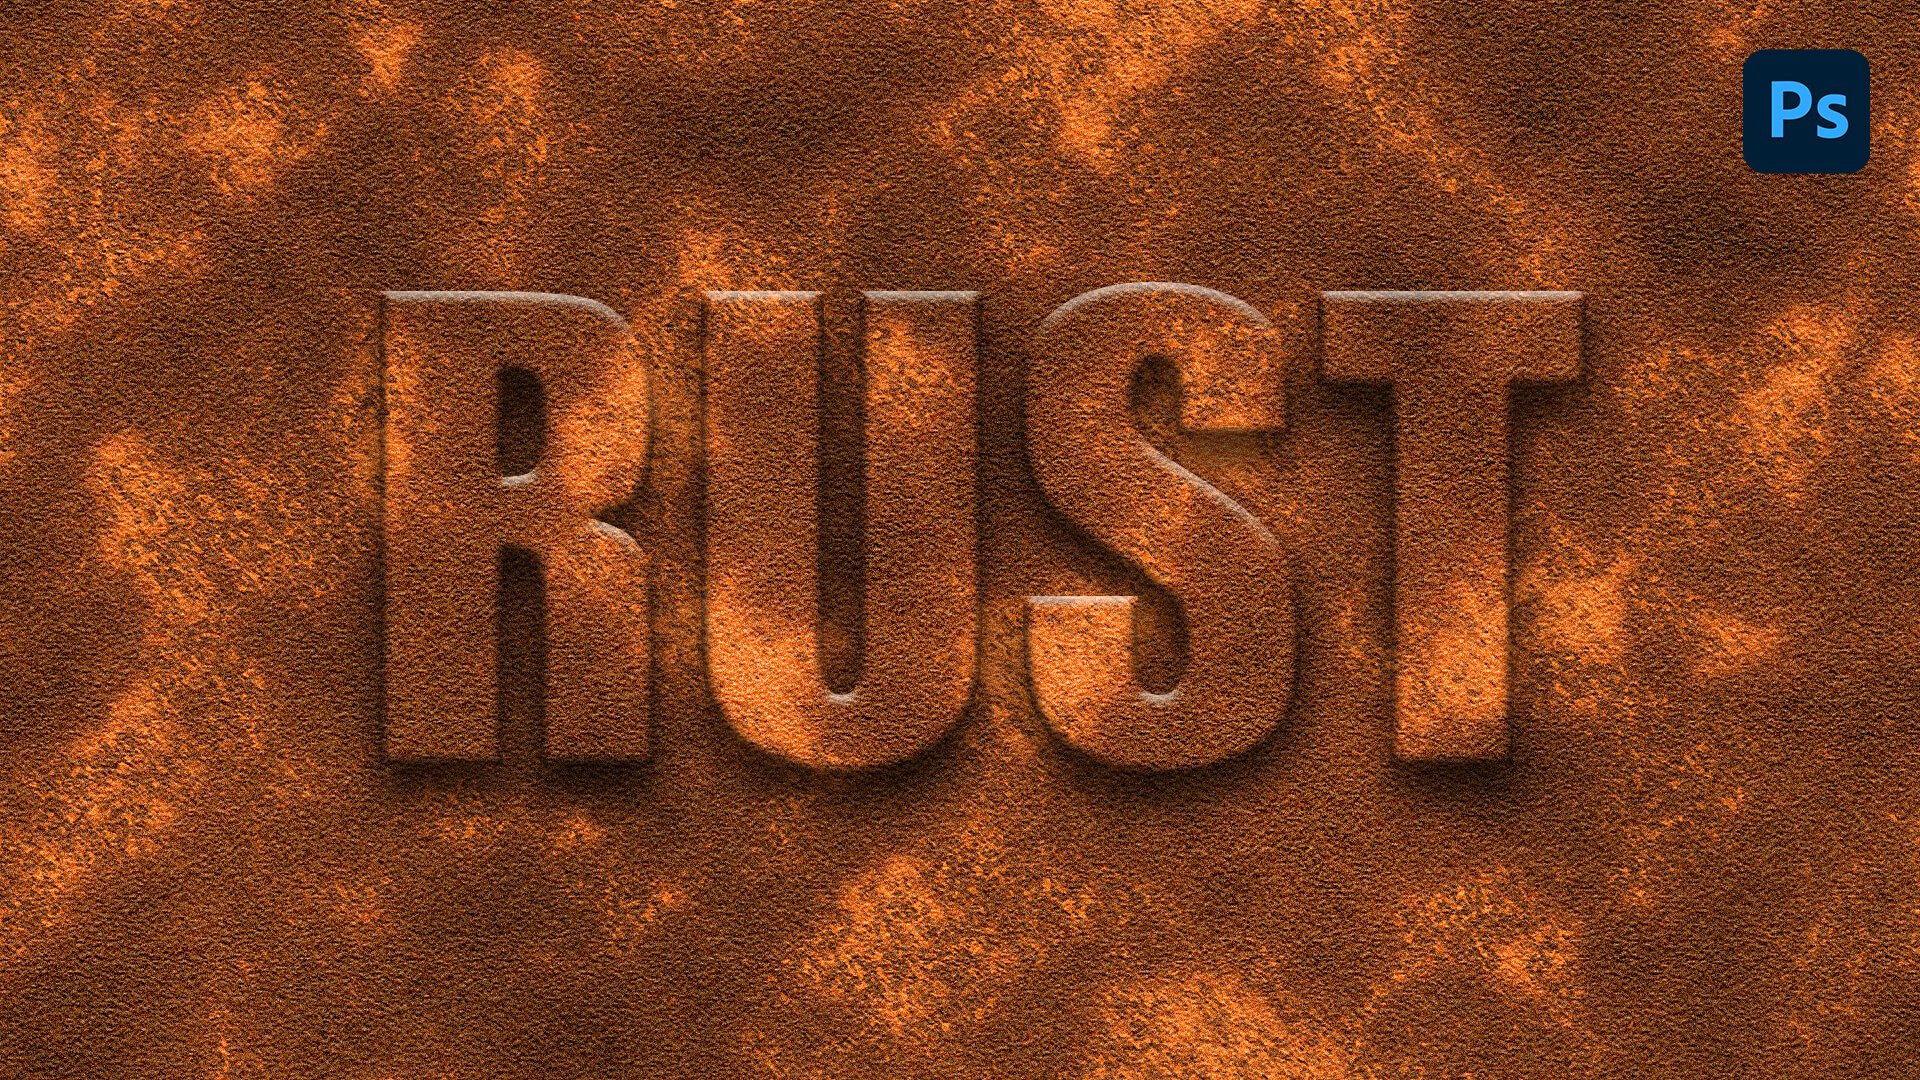 How to Make a Basic Rust Texture in Photoshop